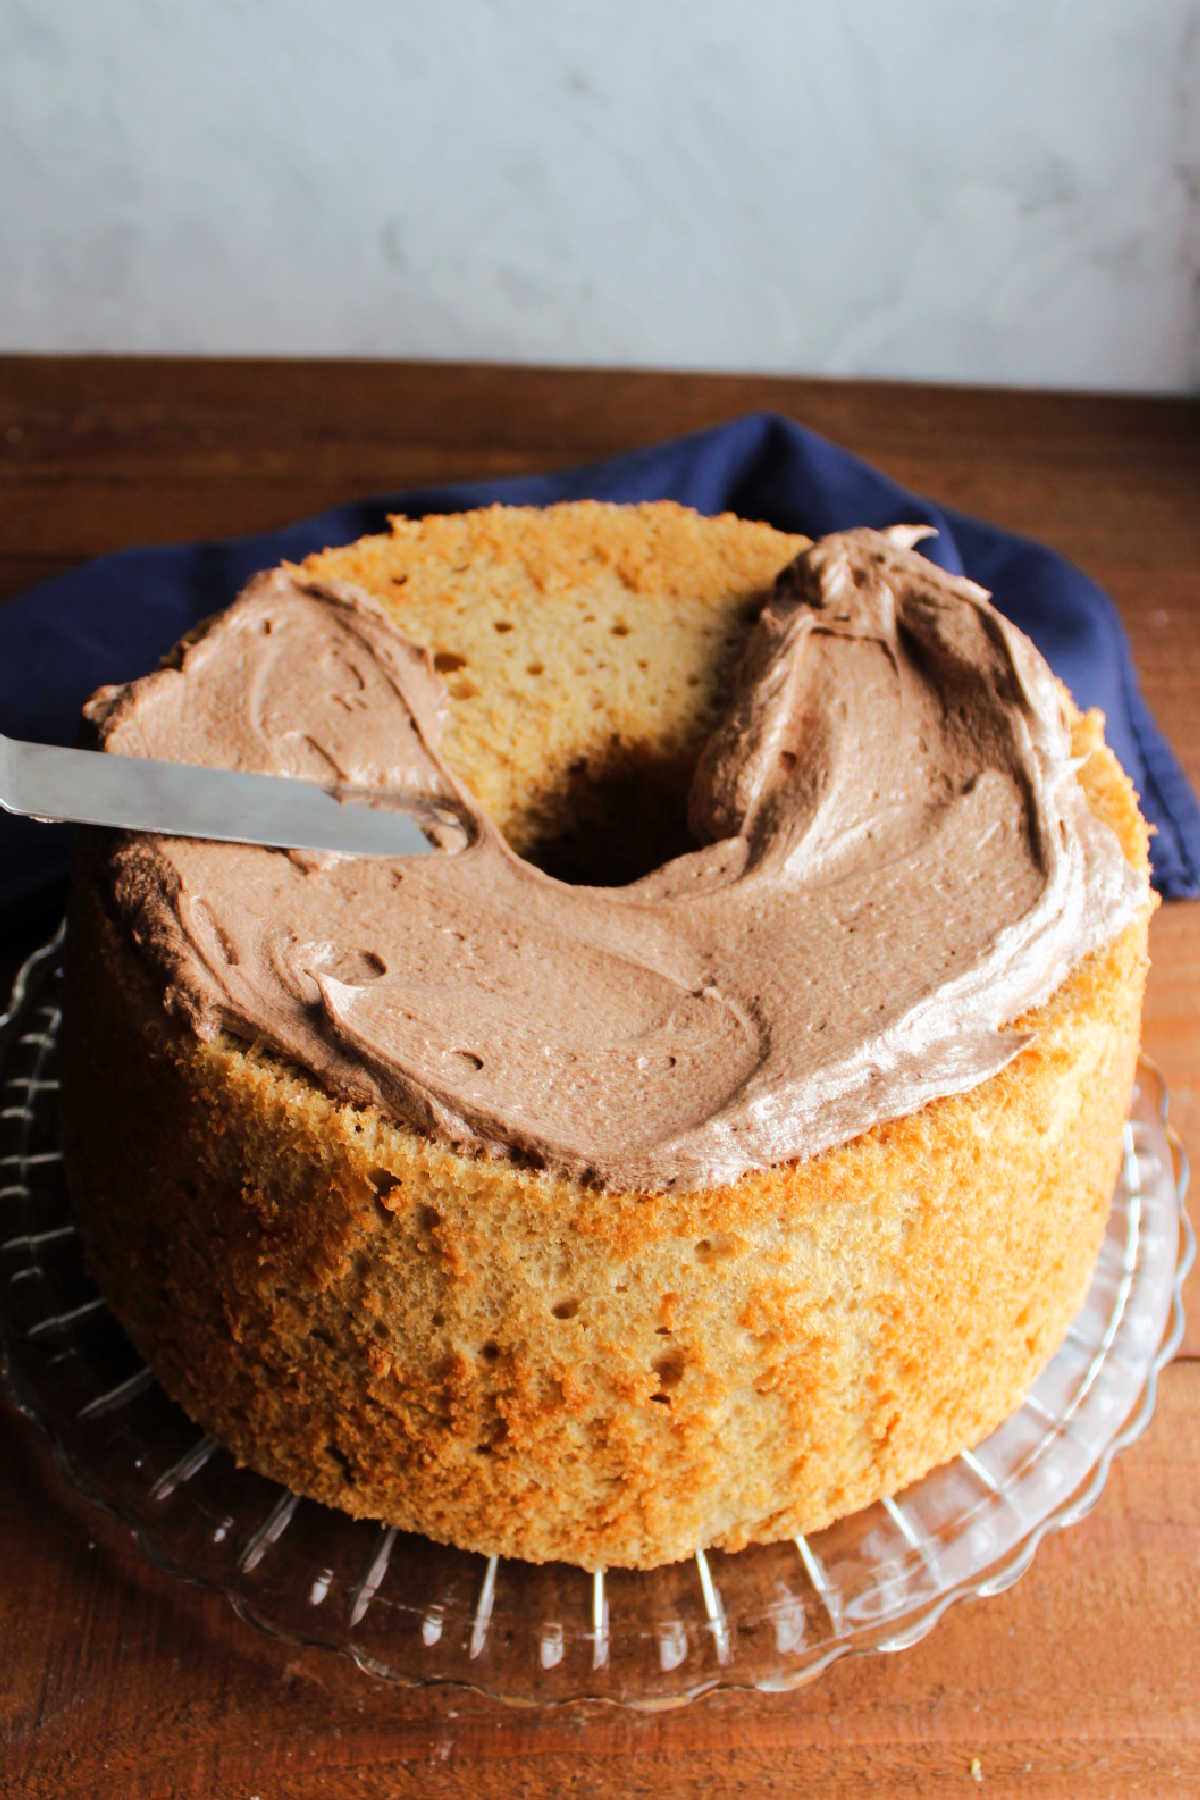 Spreading mocha mousse frosting over coffee angel food cake.